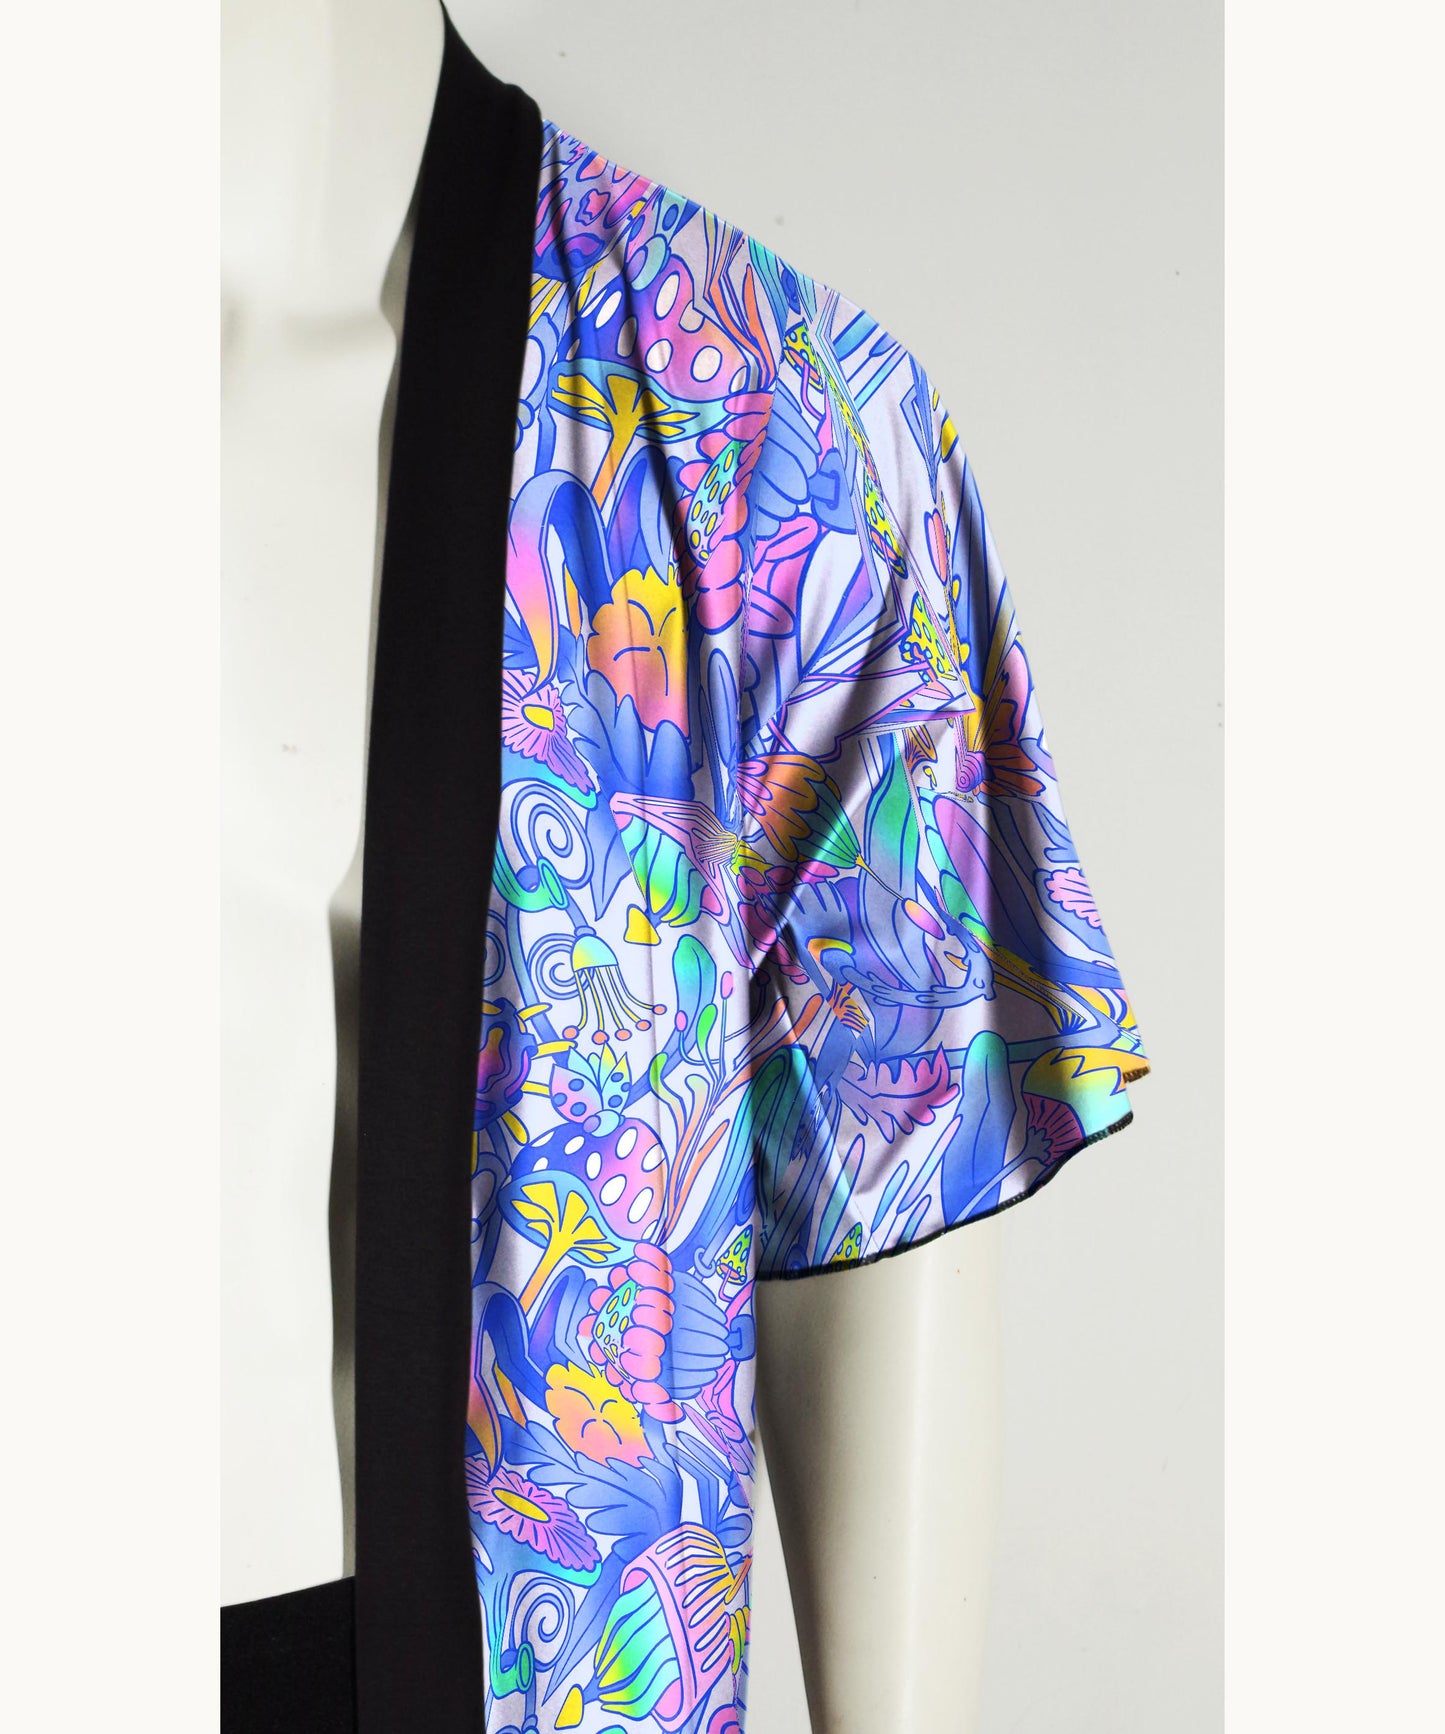 Festival Kimono Mens or Womens with Fantastical Flora and Mushrooms